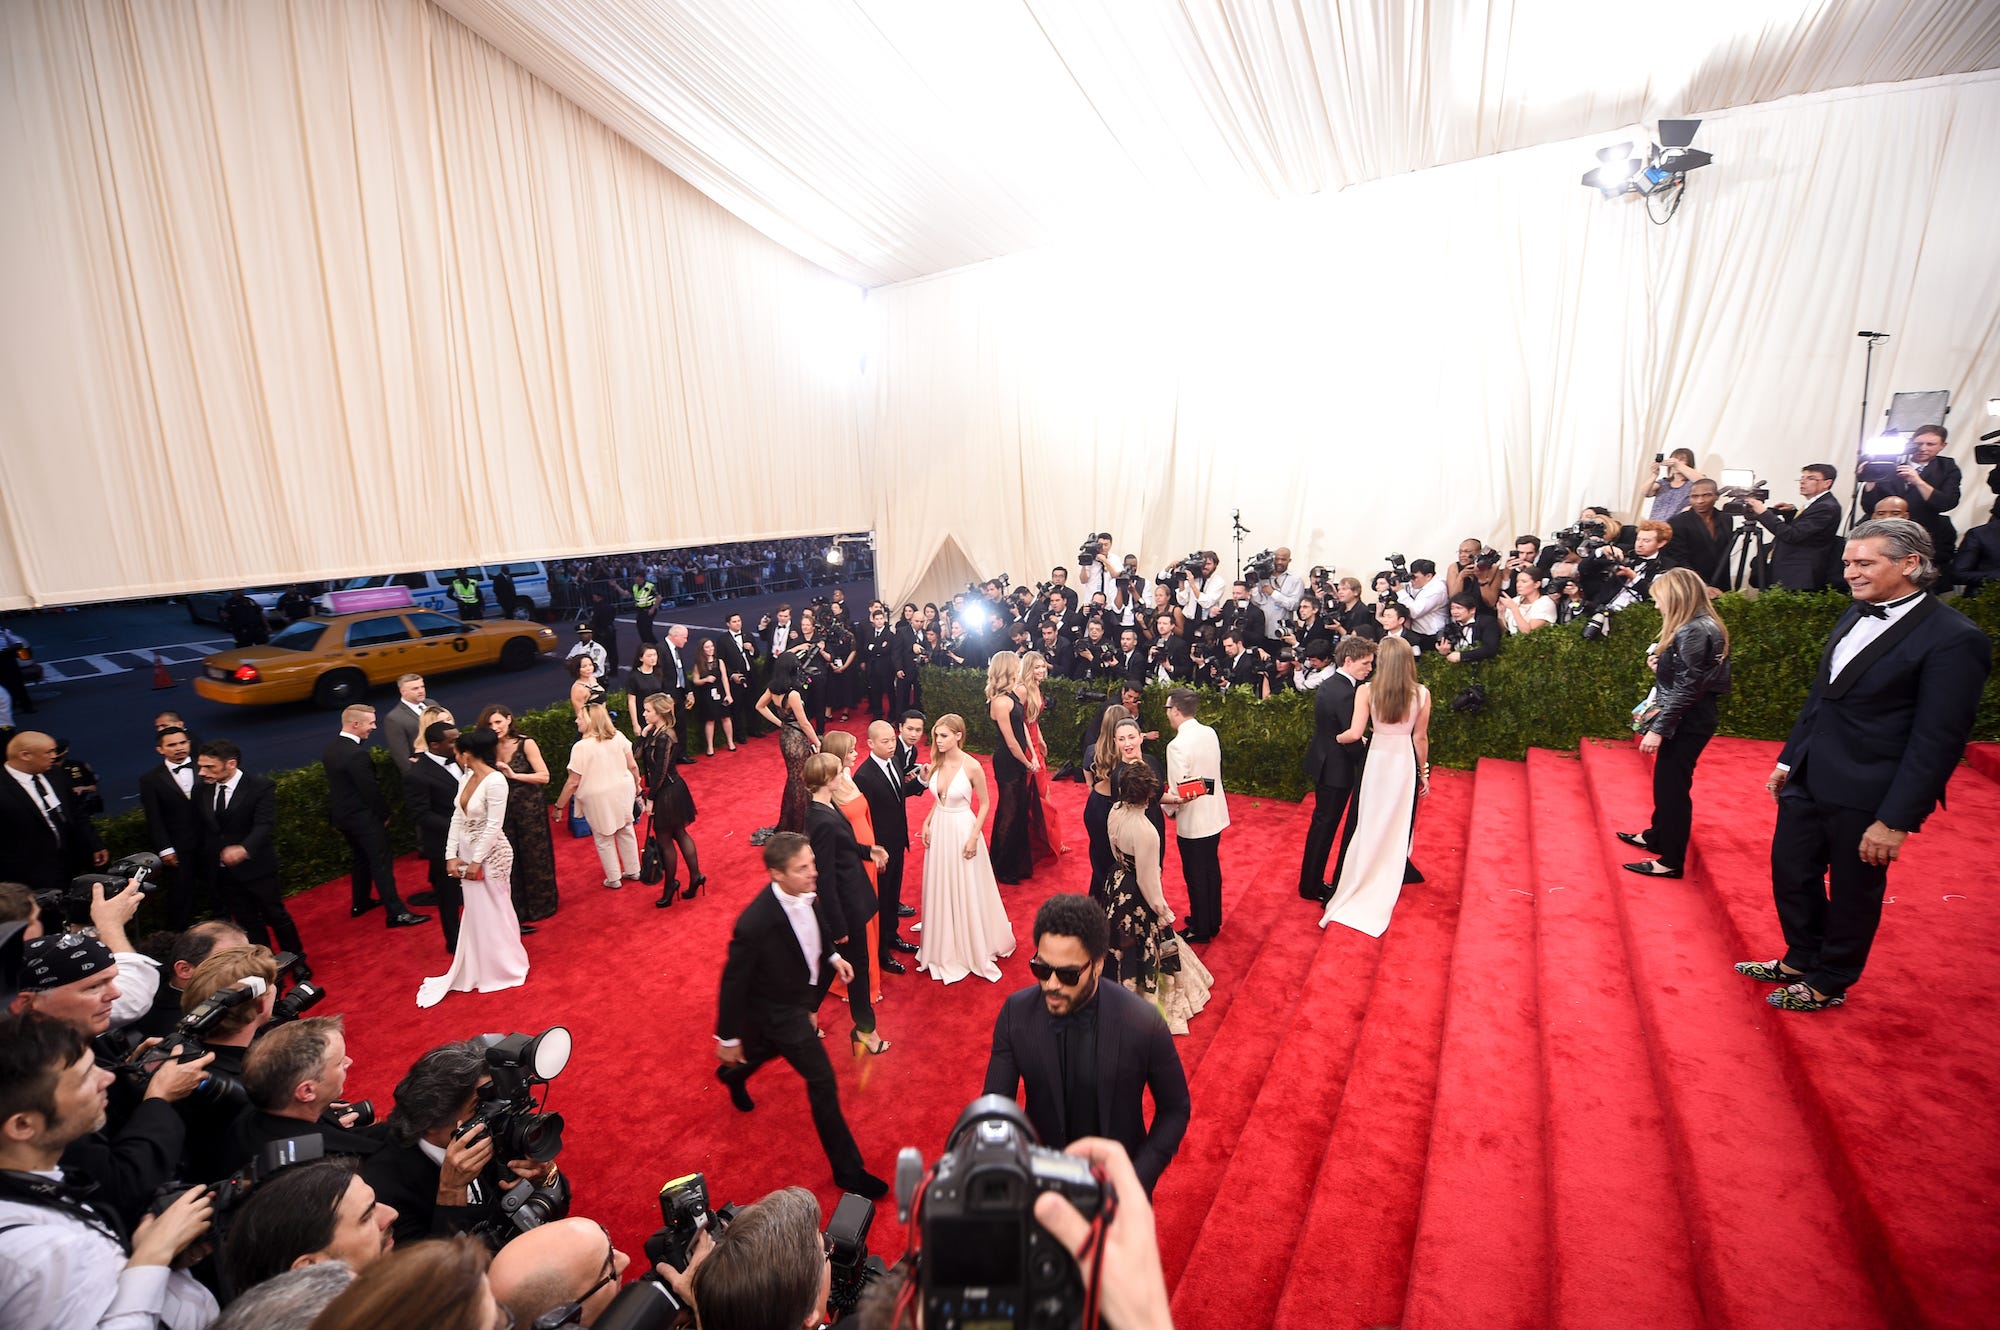 <ul class="summary-list"><li>The 2024 Met Gala is today in New York City.</li><li>Its theme is "Sleeping Beauties: Reawakening Fashion," and the dress code is "The Garden of Time."</li><li>Celebrities and billionaires, including Jeff Bezos and Rihanna, are expected to walk the red carpet.</li></ul><p>It's finally time for fashion's biggest night.</p><p>On Monday night, the world's most famous, influential, and wealthy stars will visit the Metropolitan Museum of Art in New York to attend the annual <a href="https://www.businessinsider.com/met-gala">Met Gala</a> and fundraise for the center's Costume Institute.</p><p>This year's exhibit and ball highlights historical garments and technological advancements in style with a "<a href="https://www.businessinsider.com/met-gala-2024-theme-sleeping-beauties-reawakening-fashion-stylist-predictions-2023-11">Sleeping Beauties: Reawakening Fashion" theme</a>. The night's dress code, "The Garden of Time," is inspired by a 1962 short story of the same name.</p><p>Keep an eye on this page for the night's latest news, from surprising celebrity moments to standout fashion looks.</p><div class="read-original">Read the original article on <a href="https://www.businessinsider.com/met-gala-live-updates-red-carpet-arrivals-outfits-2024-5">Business Insider</a></div>